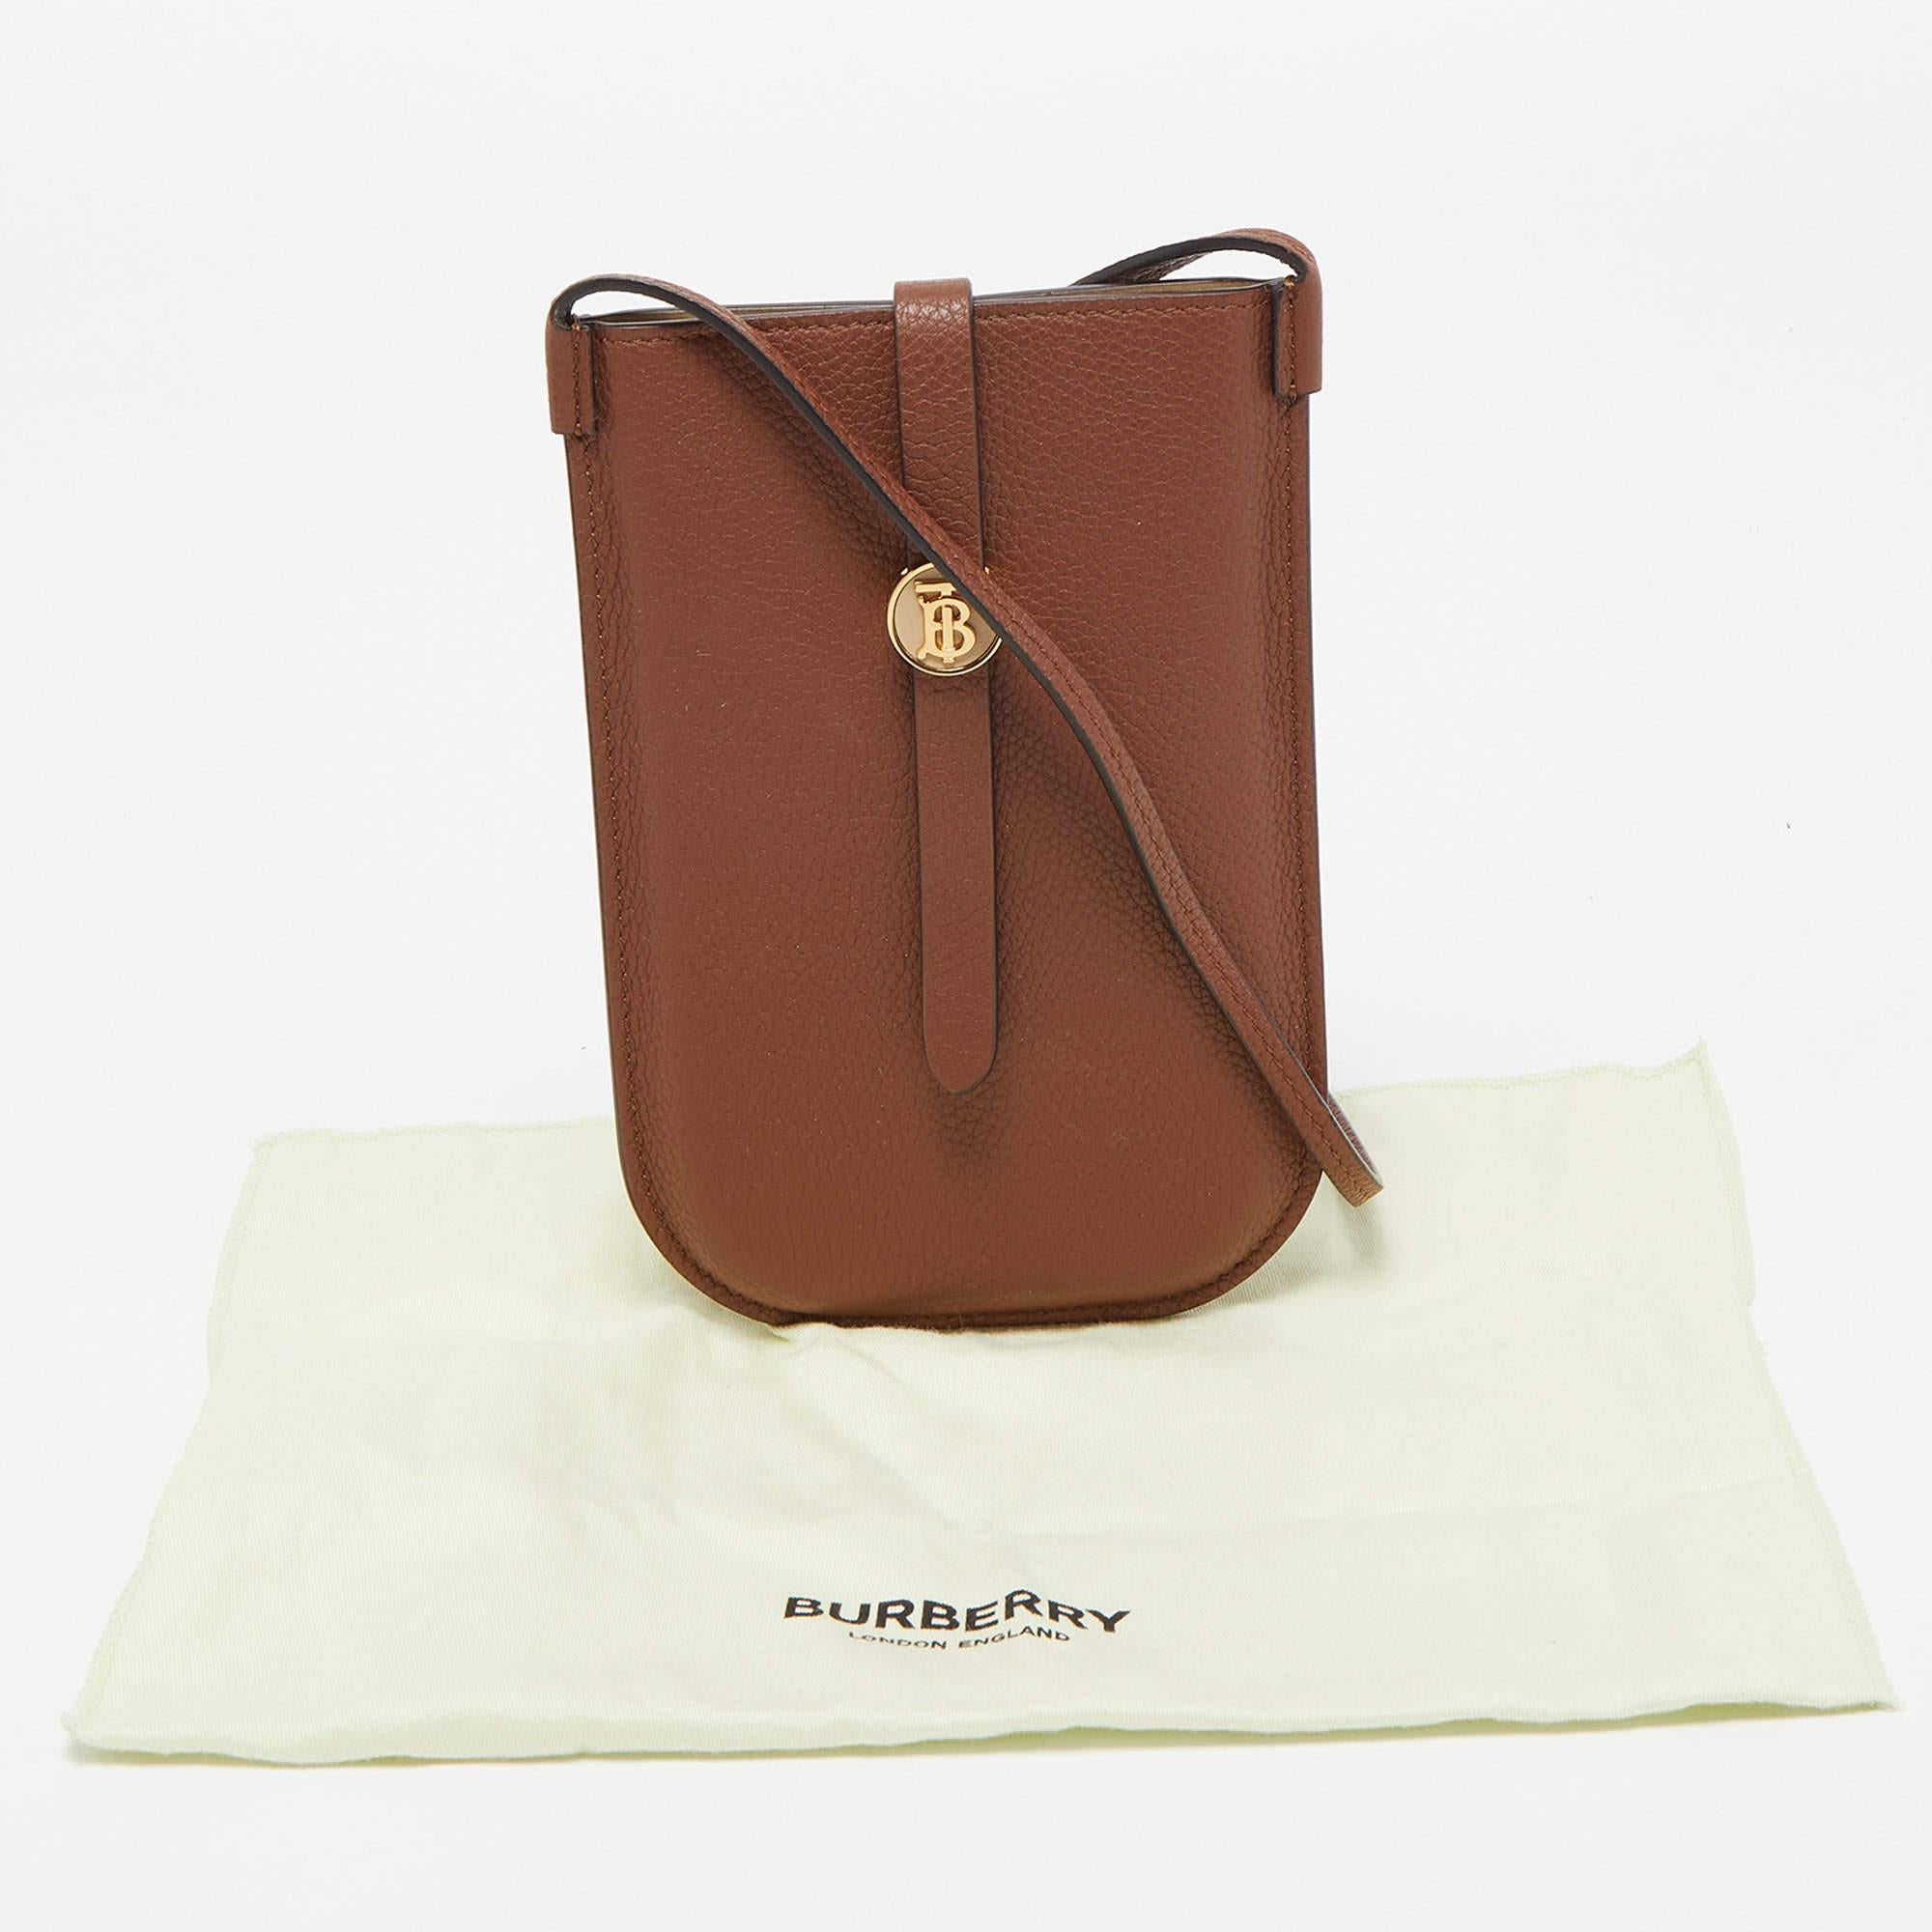 Burberry Brown Leather Anne Phone Pouch with Strap 8